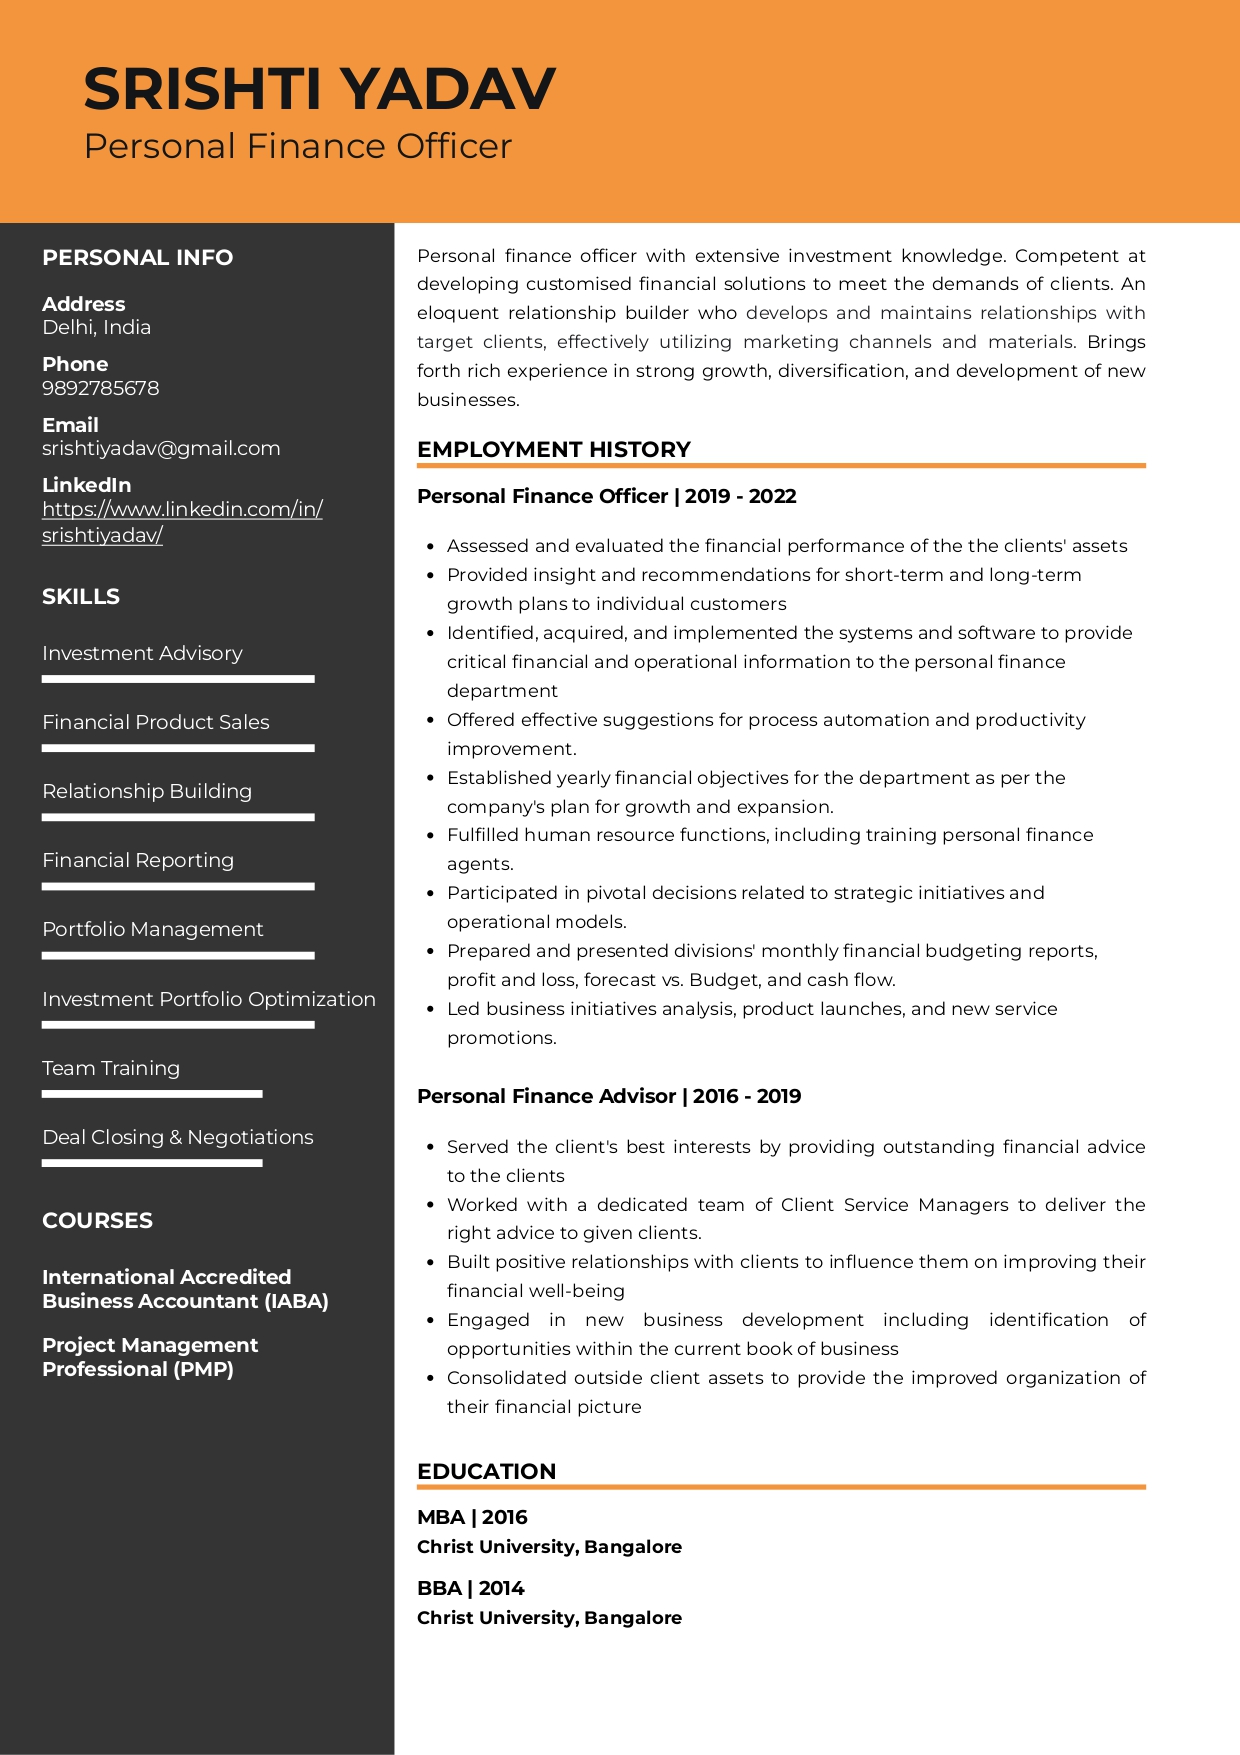 Resume of Personal Finance Officer